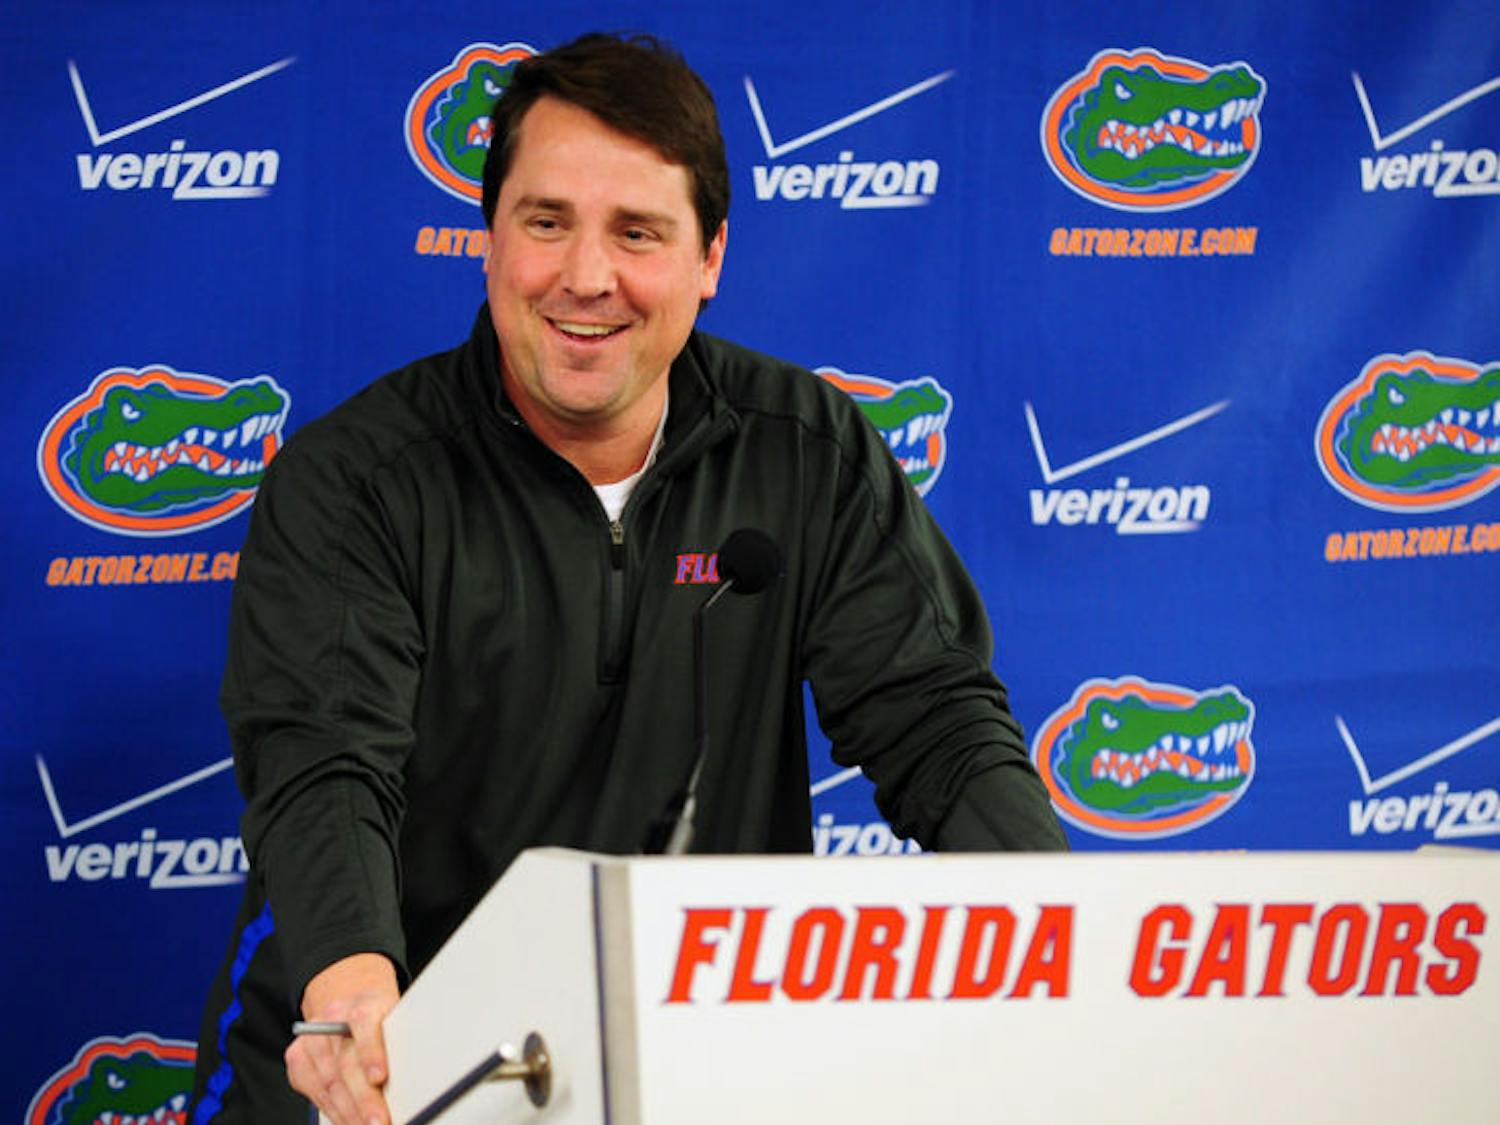 Will Muschamp speaks at a press conference in Ben Hill Griffin Stadium on Jan. 13. The Gators signed 15 players to finish 24-member recruiting class that was ranked seventh nationally, according to Rivals.com.